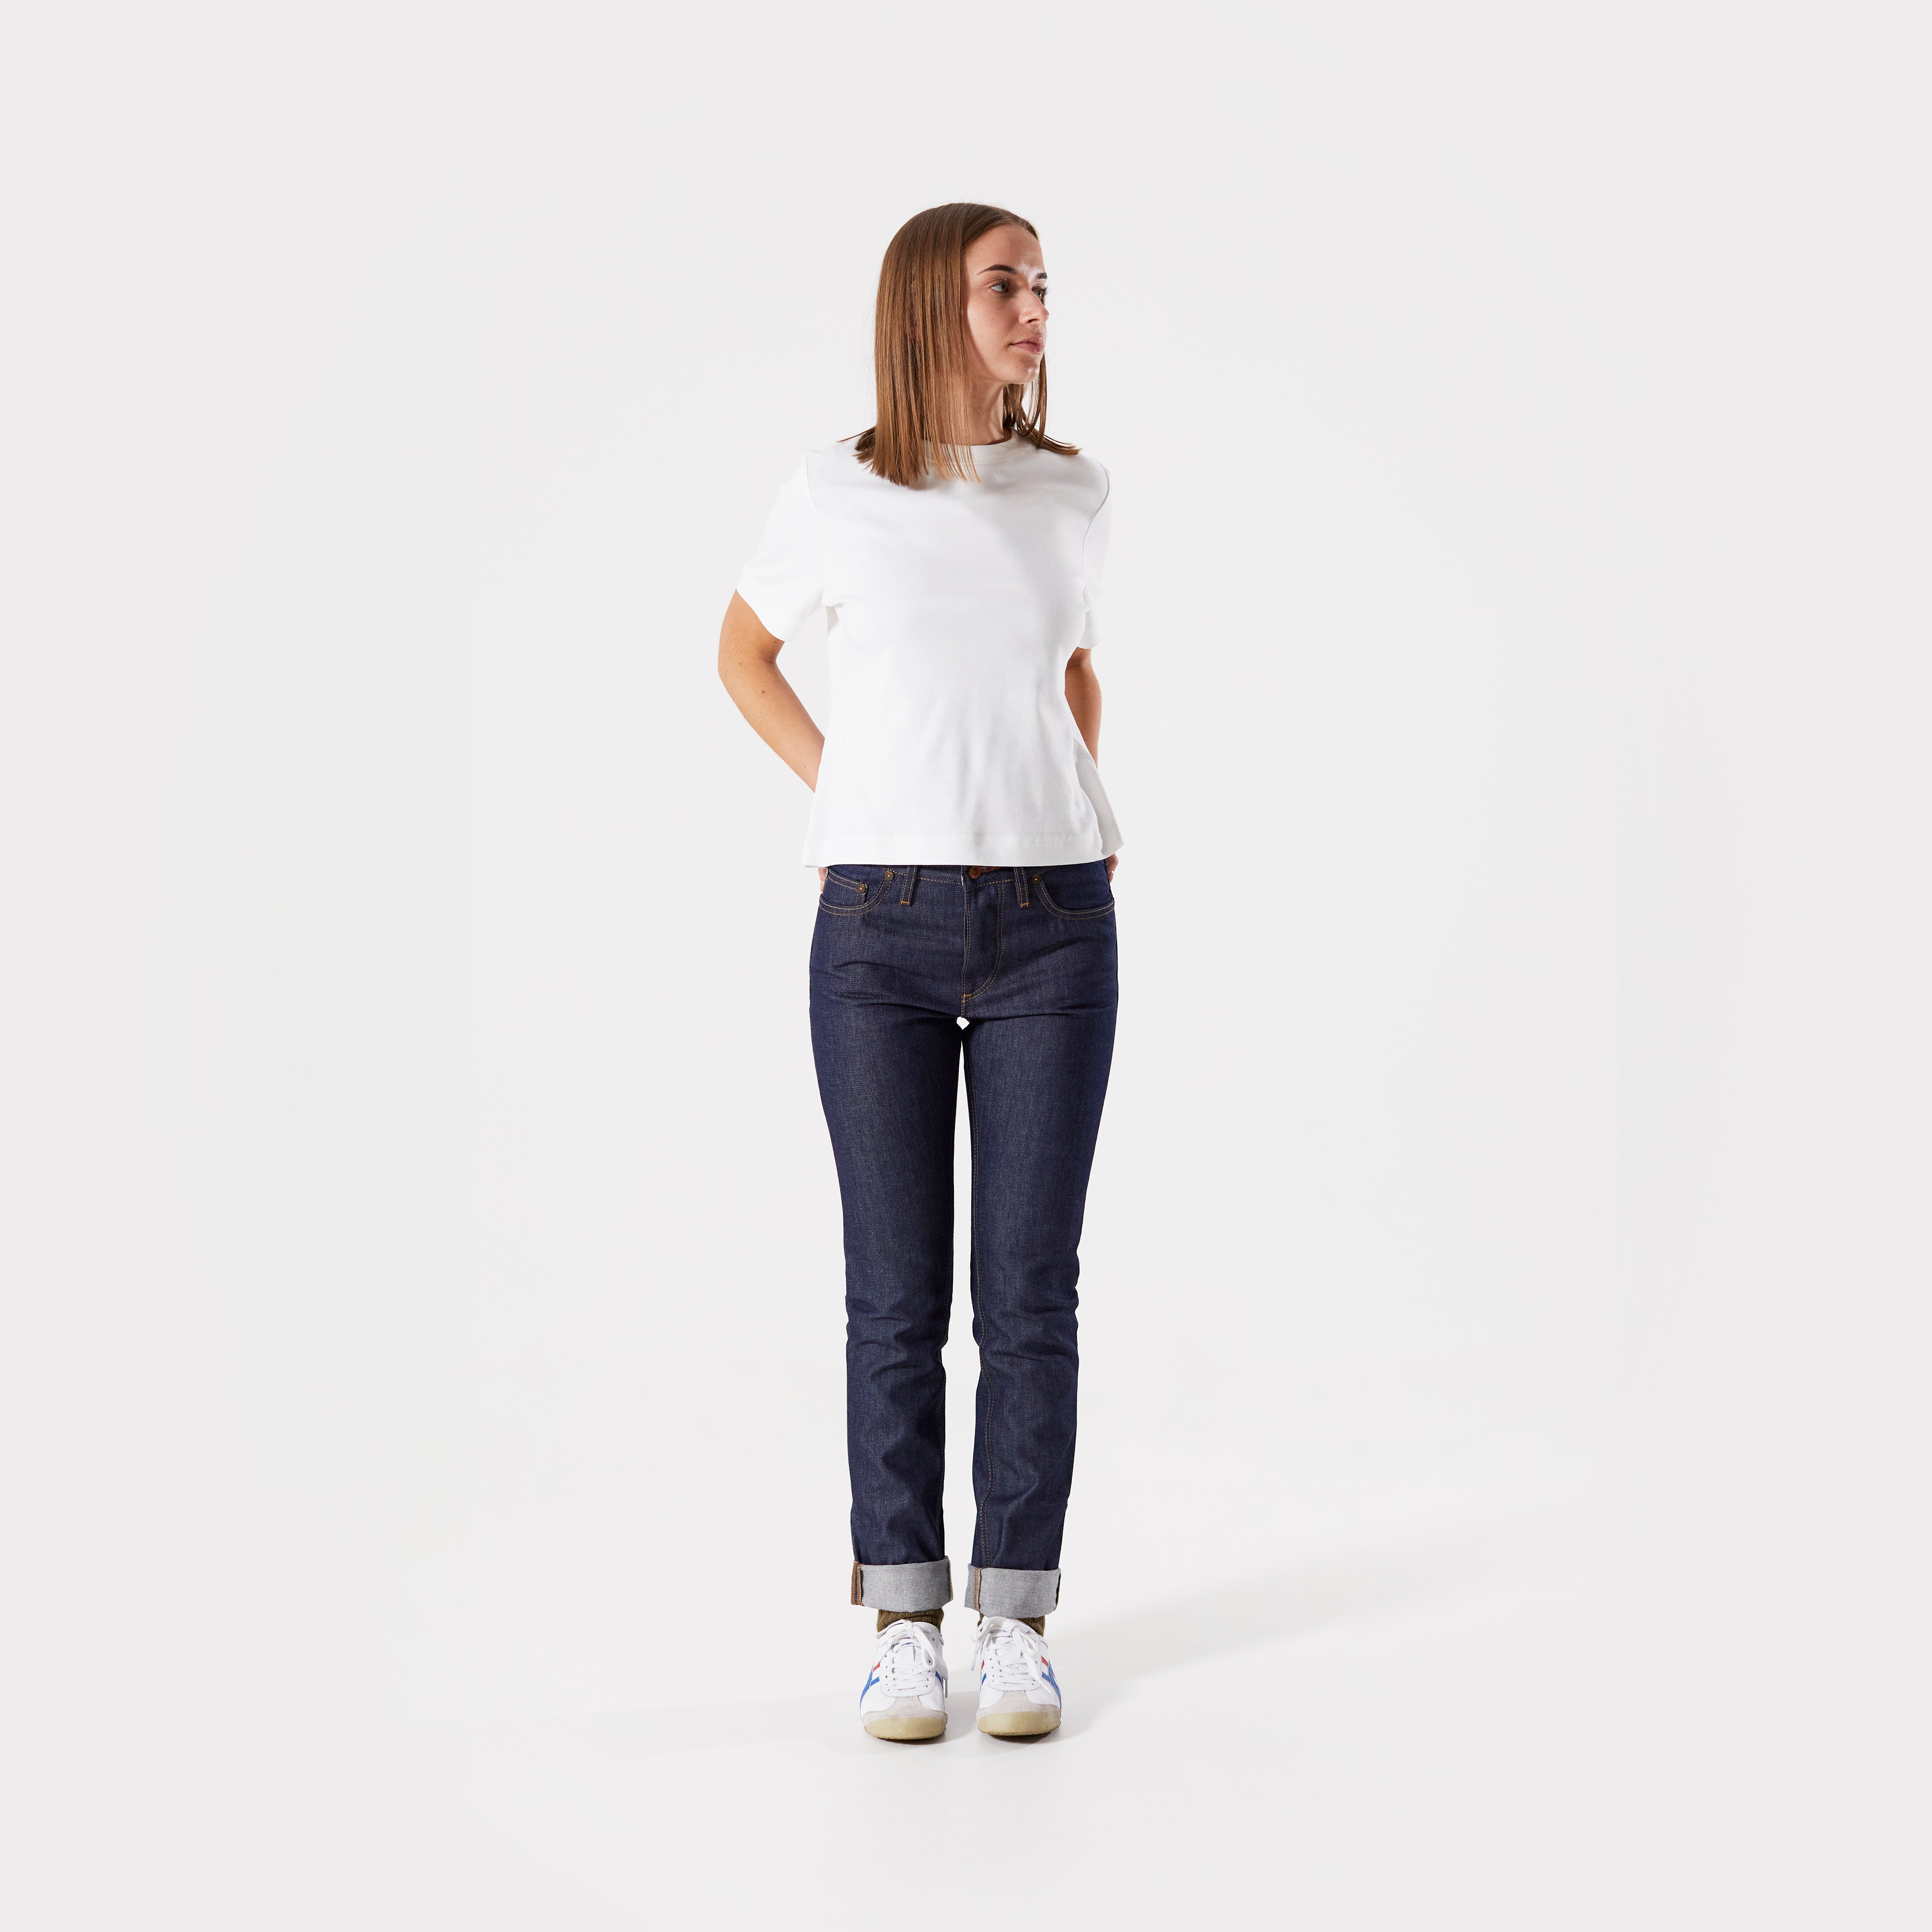 Hiut Denim Co. partners with Candiani to launch biodegradable stretch jeans